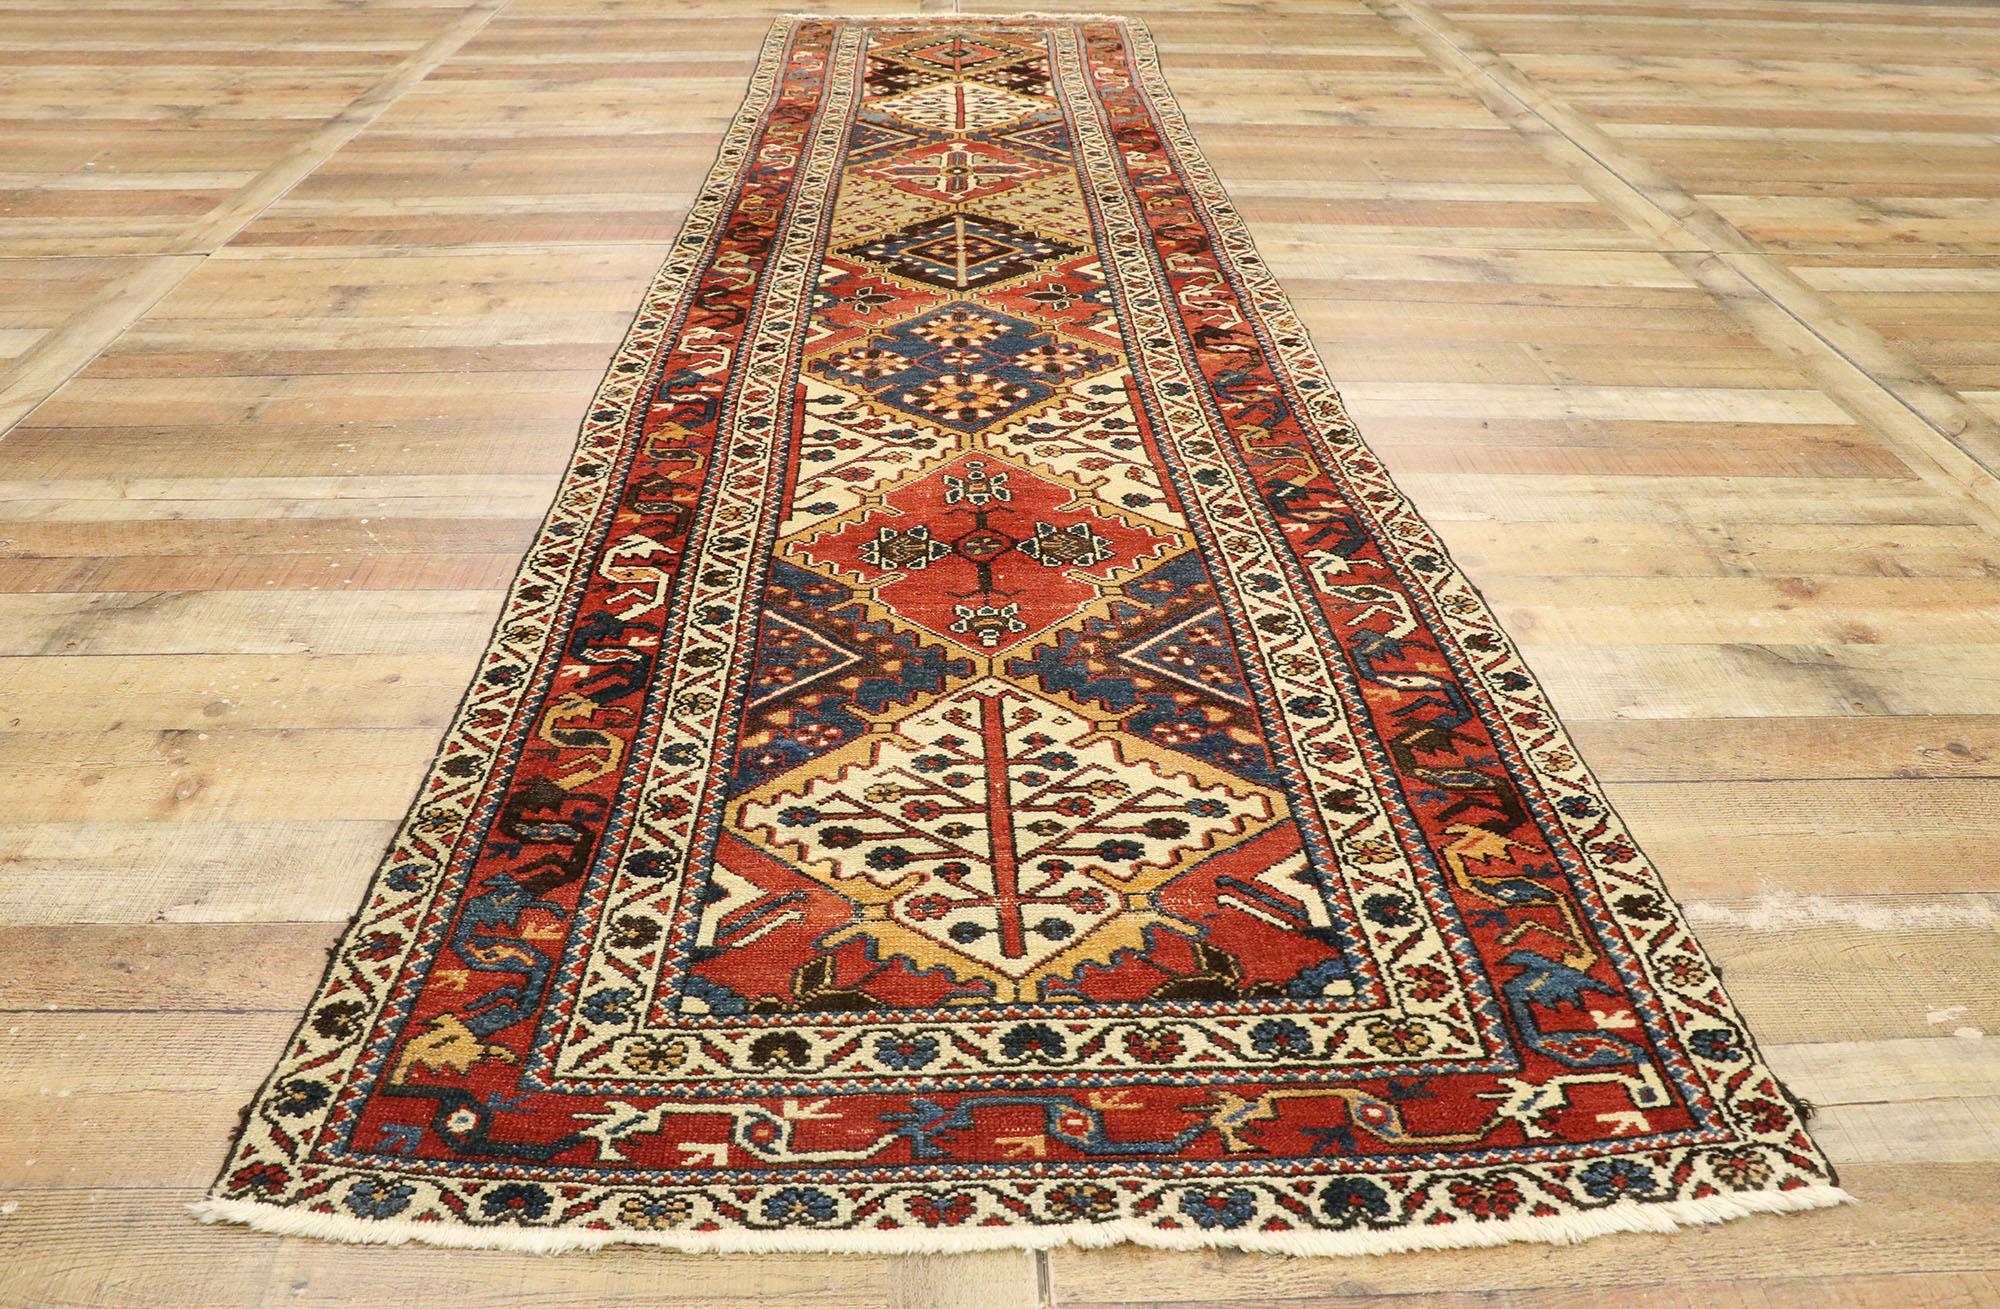 Wool Antique Persian Bakhtiari Runner with Modern Rustic Pacific Northwest Style